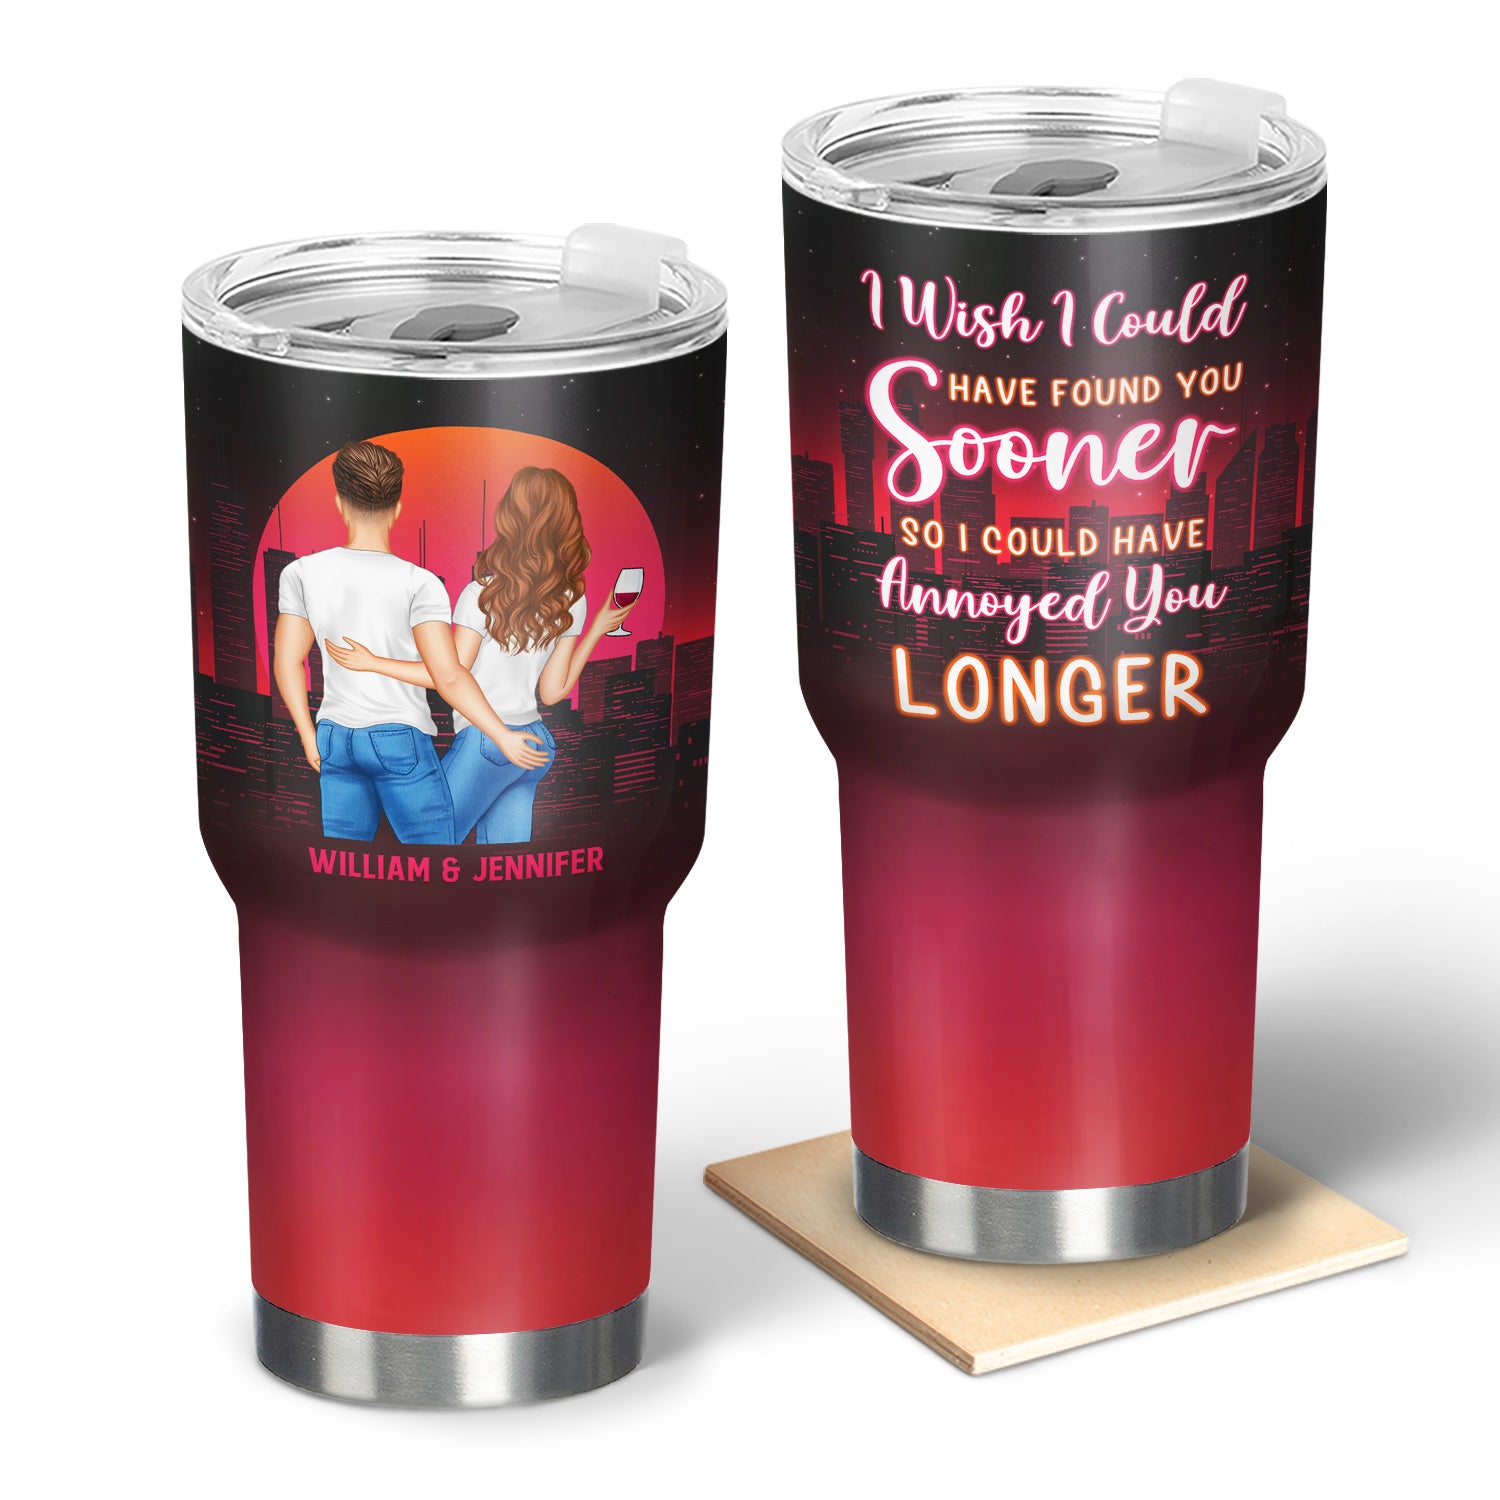 Found You Sooner Annoyed You Longer - Gift For Couples - Personalized Custom 30 Oz Tumbler